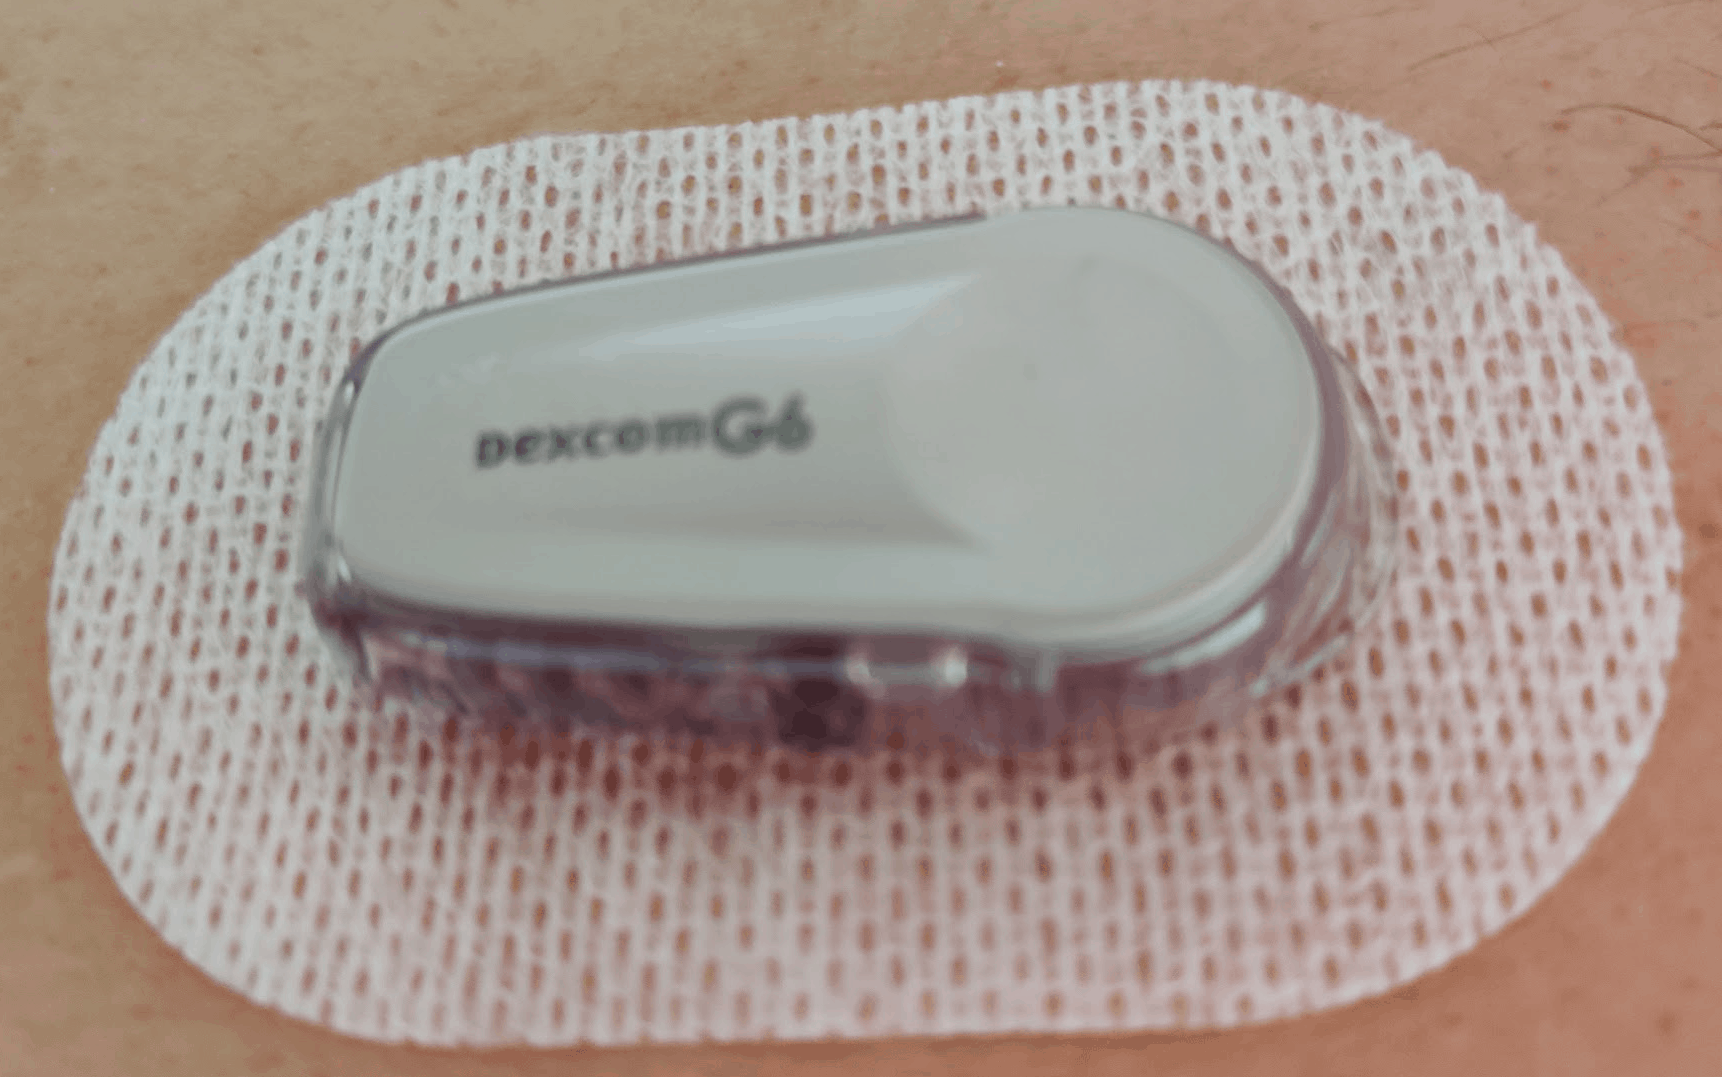 Dexcom G6 Experience after using it 1 month.